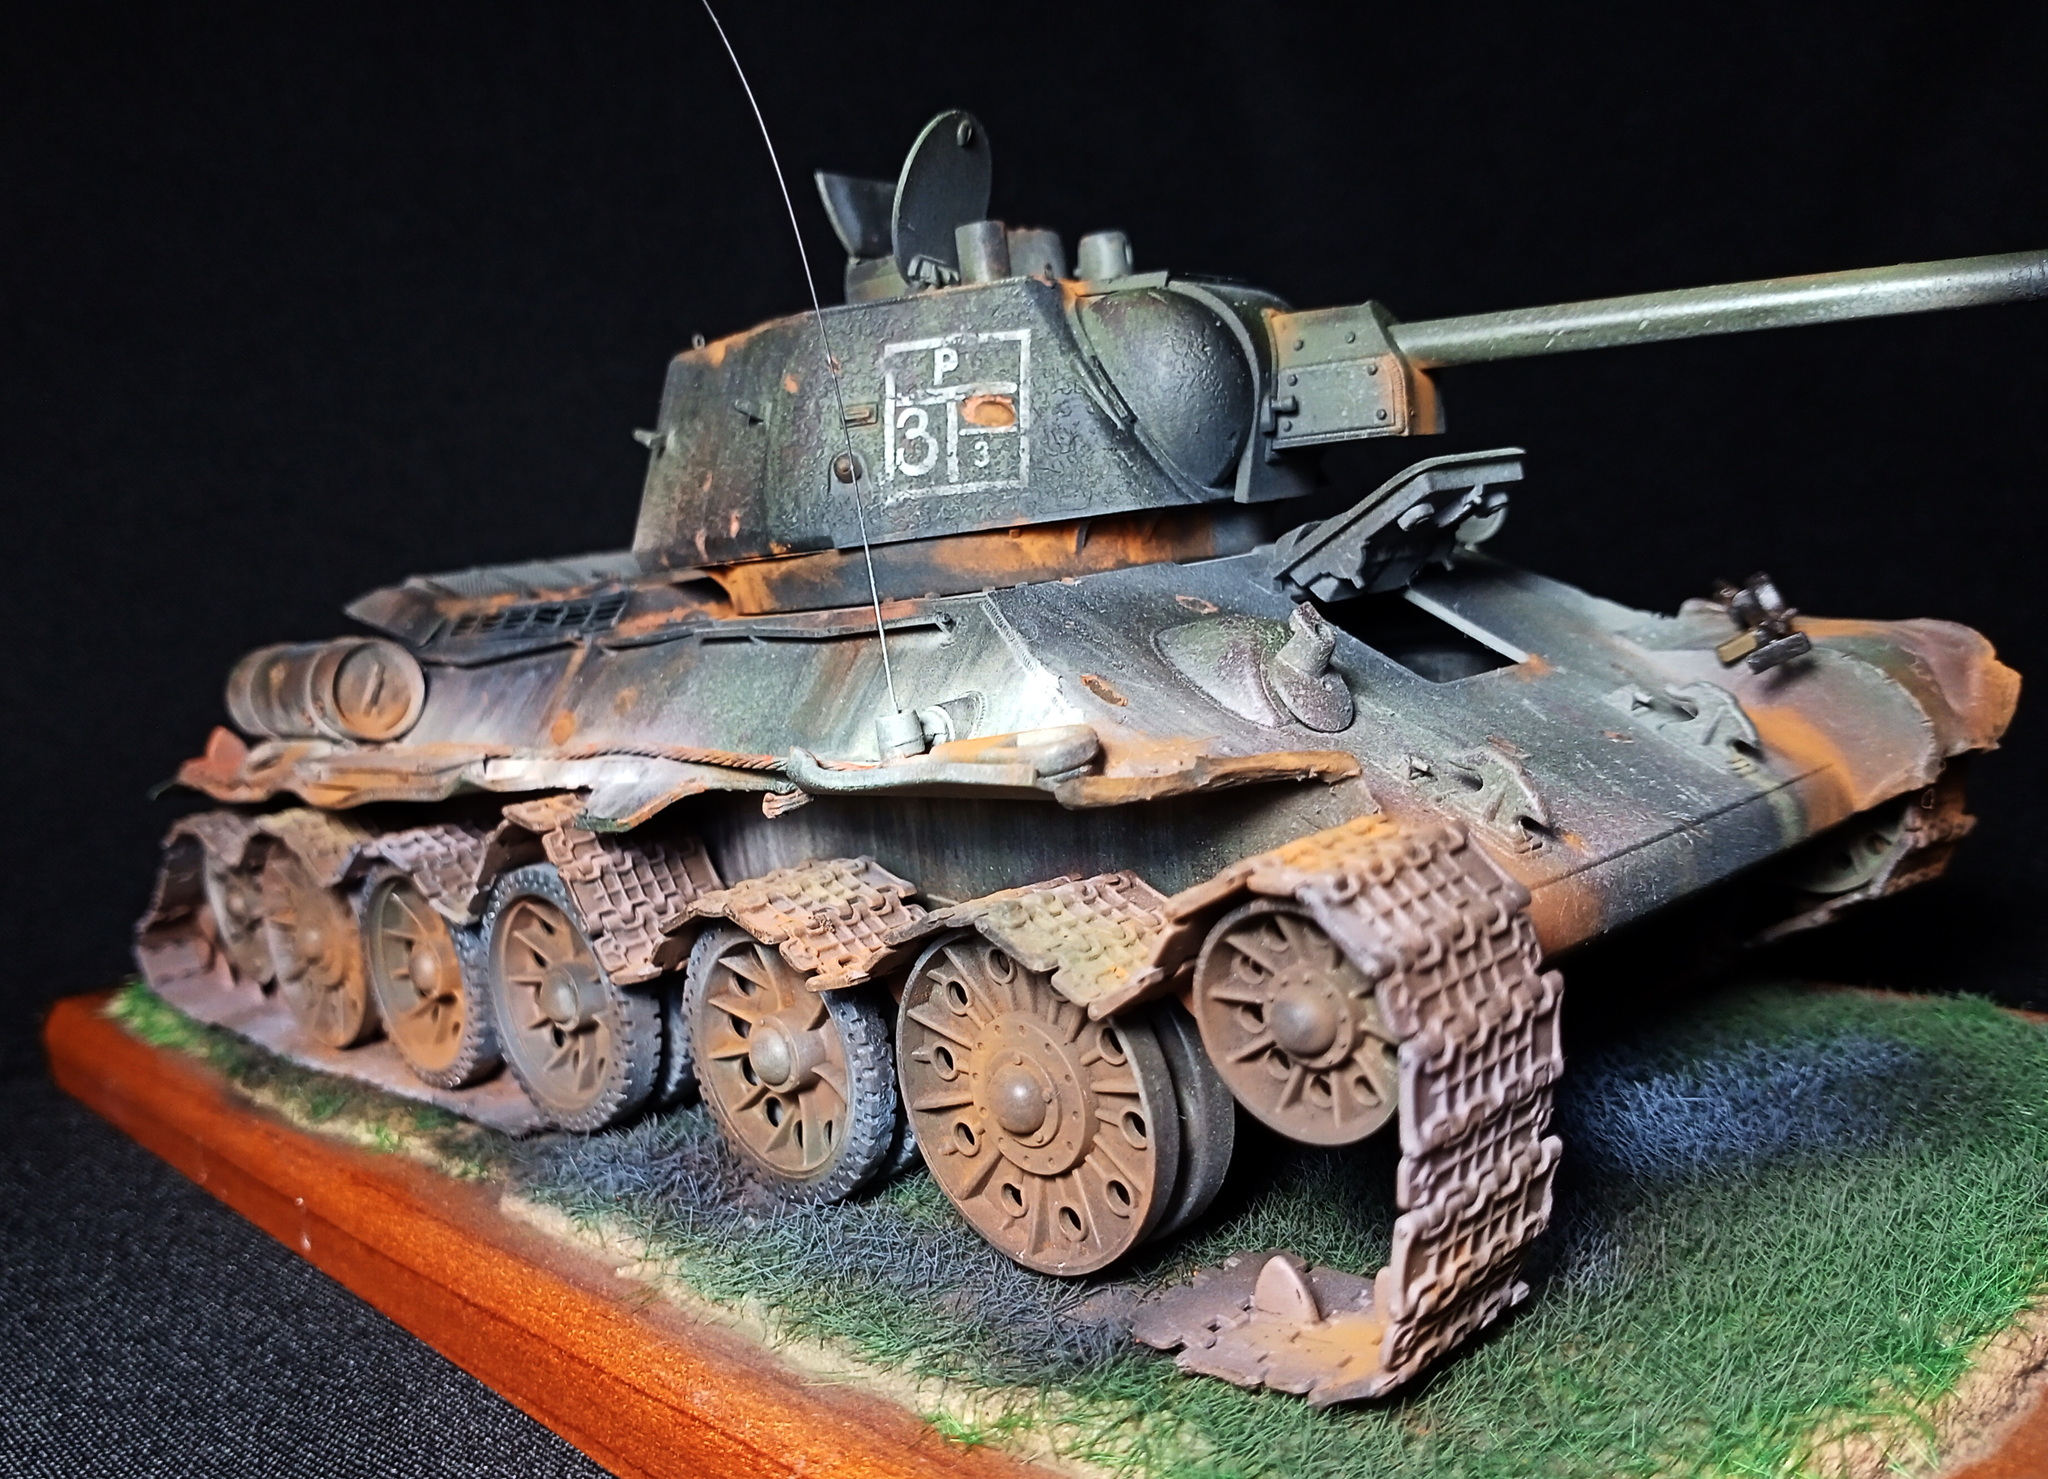 The best thirty-four with a three-inch. T-34/76 mod. 1943 - My, Modeling, Stand modeling, Prefabricated model, Miniature, With your own hands, Needlework without process, Story, Scale model, Collection, Collecting, Tanks, Armored vehicles, Technics, Military equipment, Interesting, The Second World War, The Great Patriotic War, T-34, Diorama, Video, Longpost